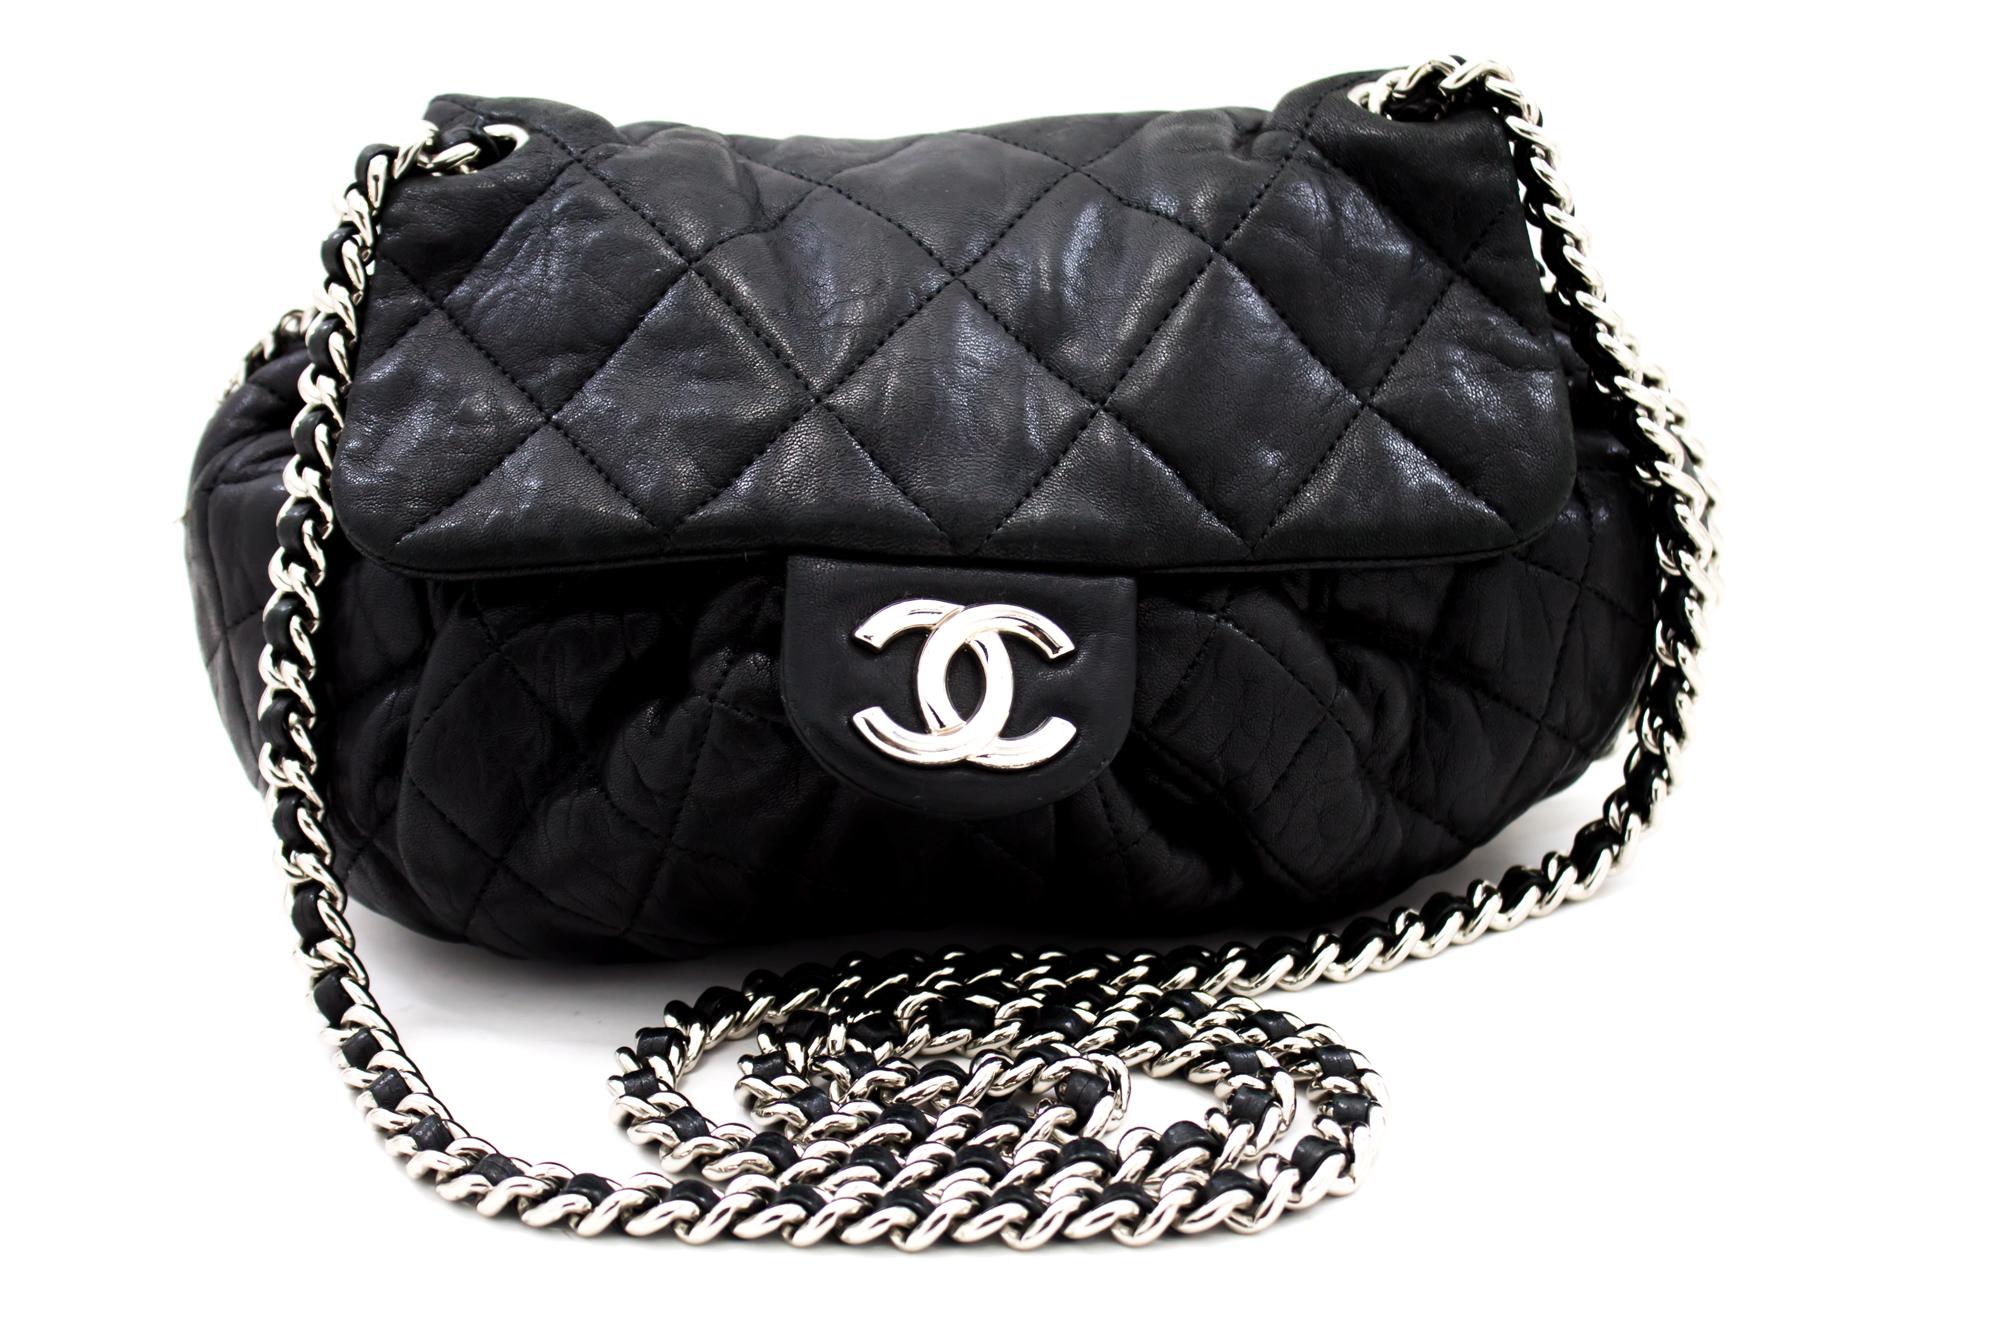 An authentic CHANEL Chain Around Shoulder Bag Crossbody Black Calfskin Leather. The color is Black. The outside material is Leather. The pattern is Solid. This item is Contemporary. The year of manufacture would be 2010.
Conditions & Ratings
Outside